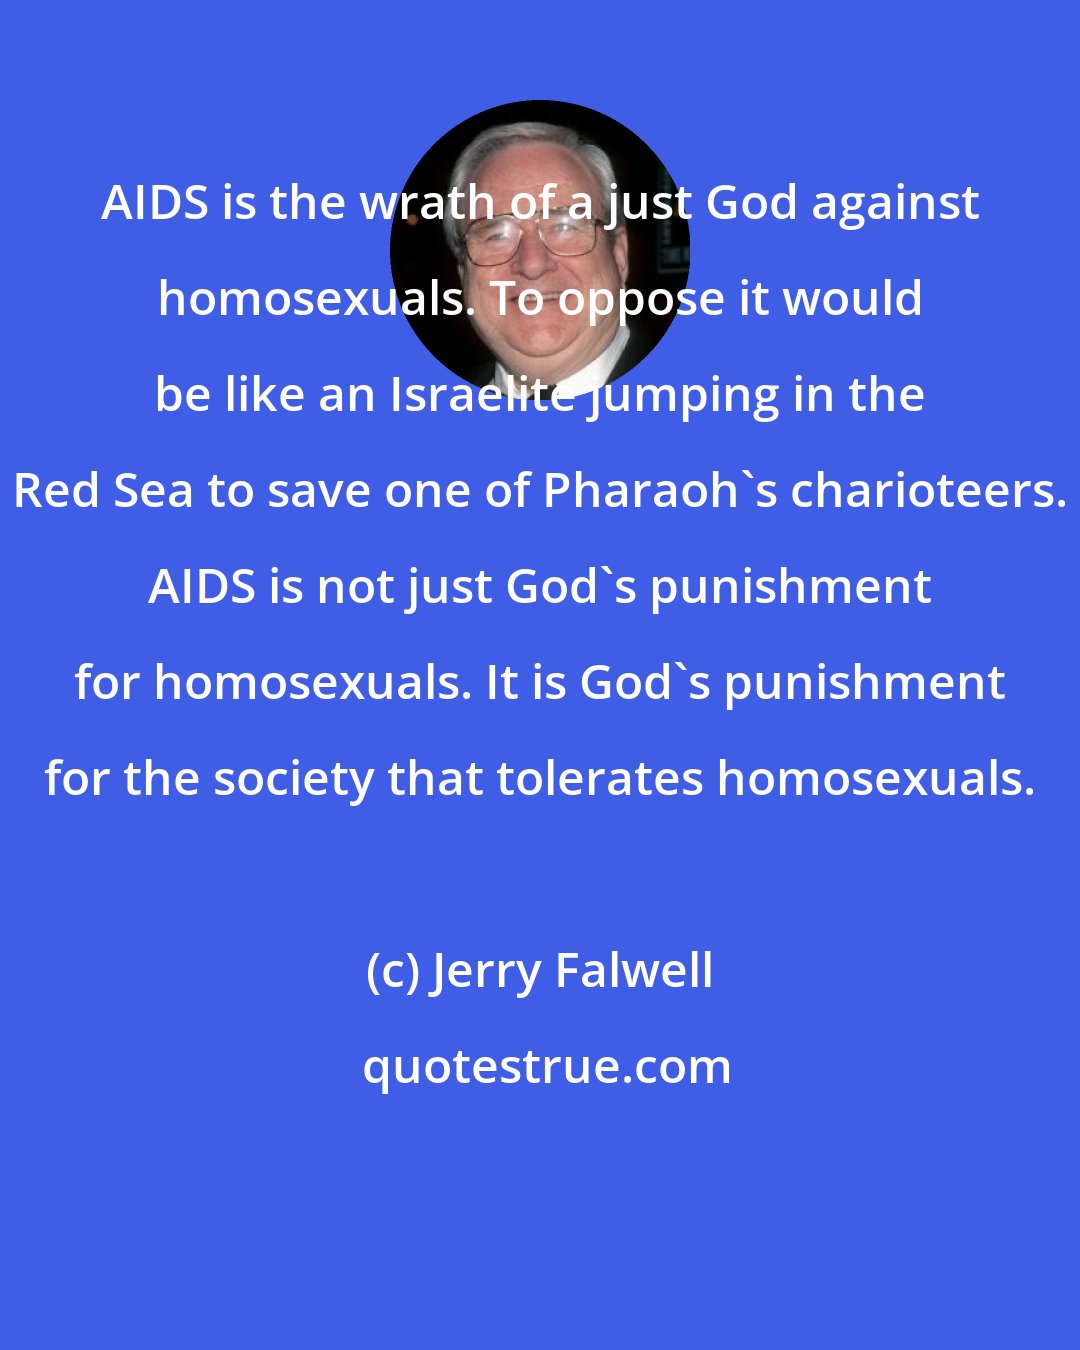 Jerry Falwell: AIDS is the wrath of a just God against homosexuals. To oppose it would be like an Israelite jumping in the Red Sea to save one of Pharaoh's charioteers. AIDS is not just God's punishment for homosexuals. It is God's punishment for the society that tolerates homosexuals.